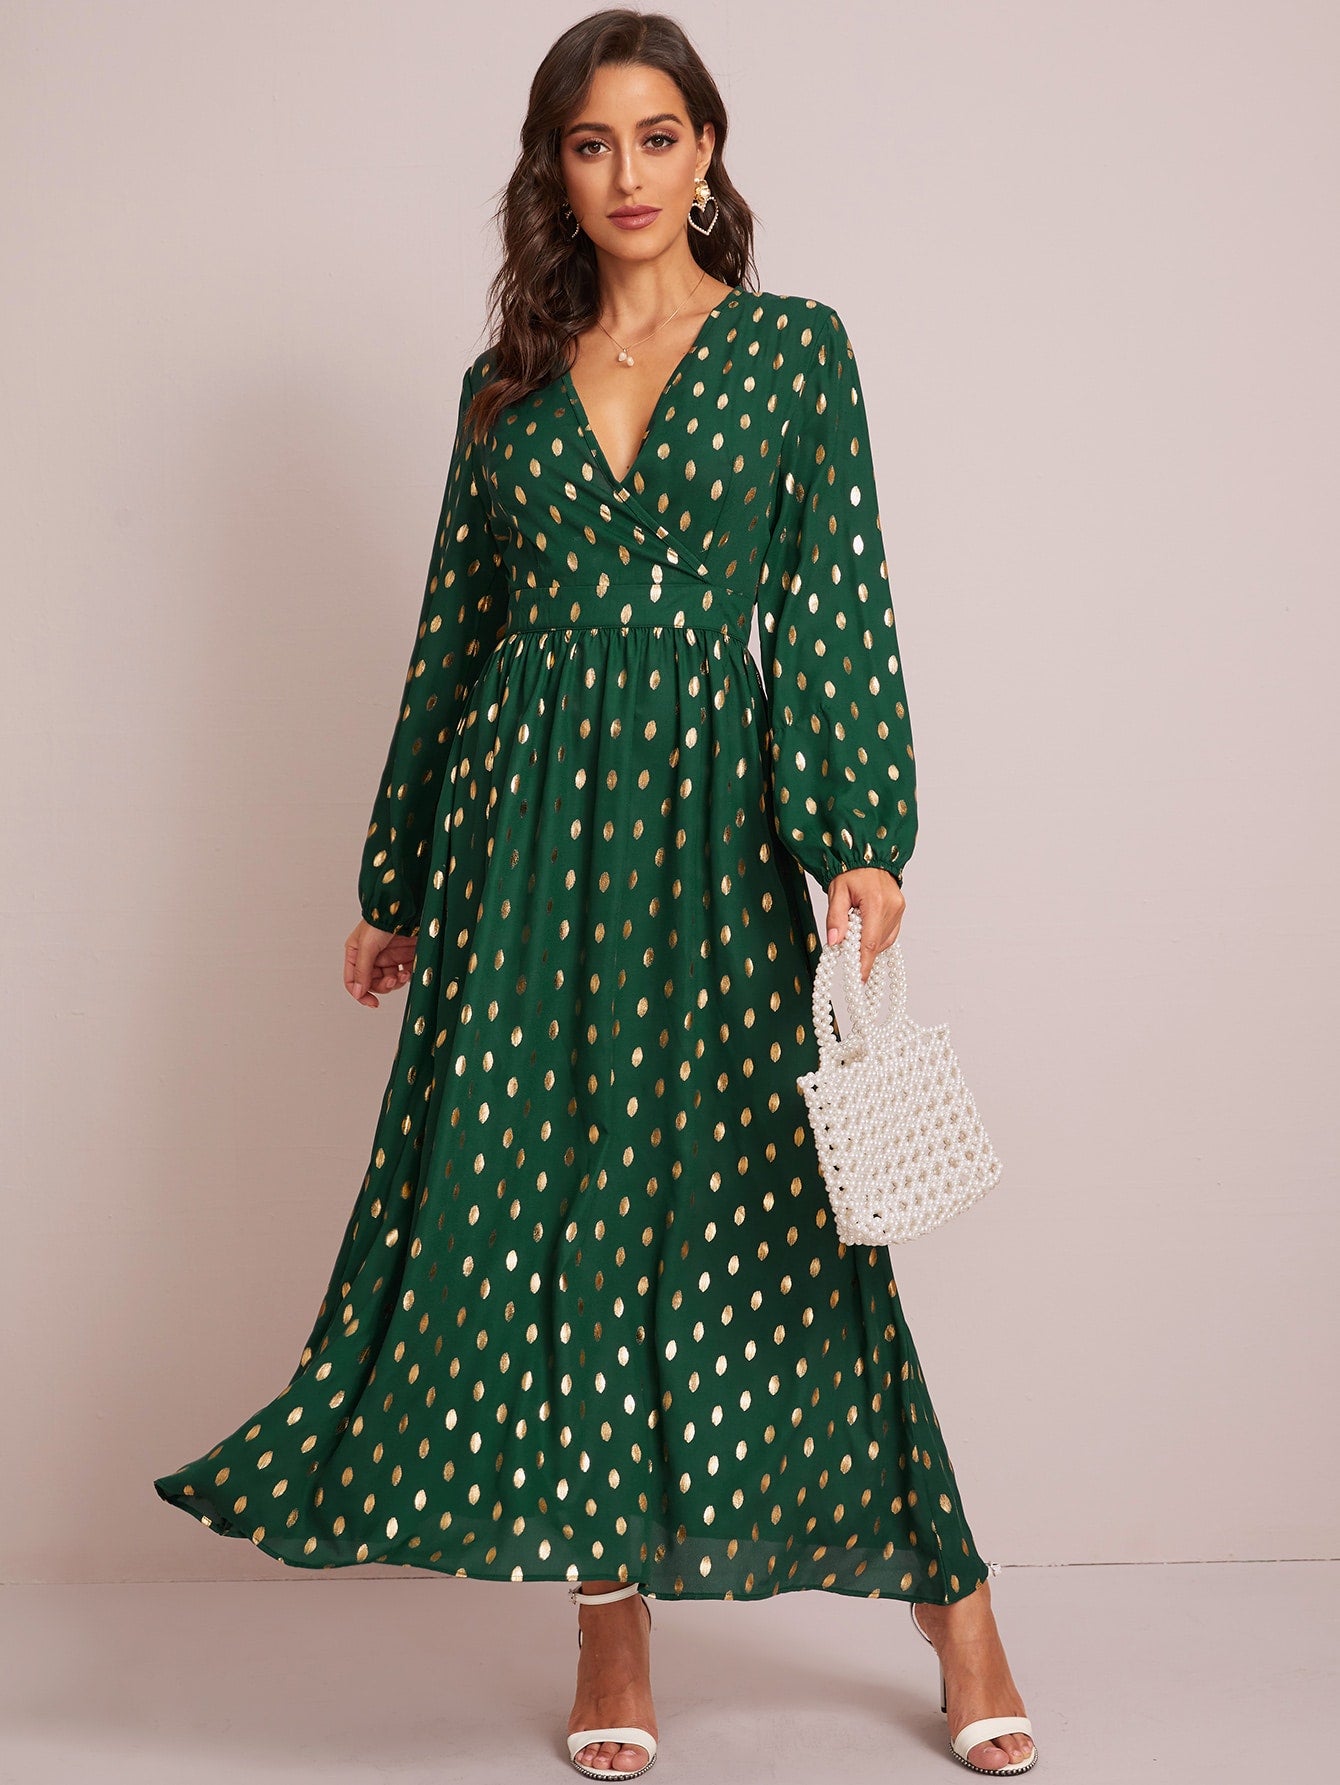 Gold Polka Dotted Surplice A-line Dress